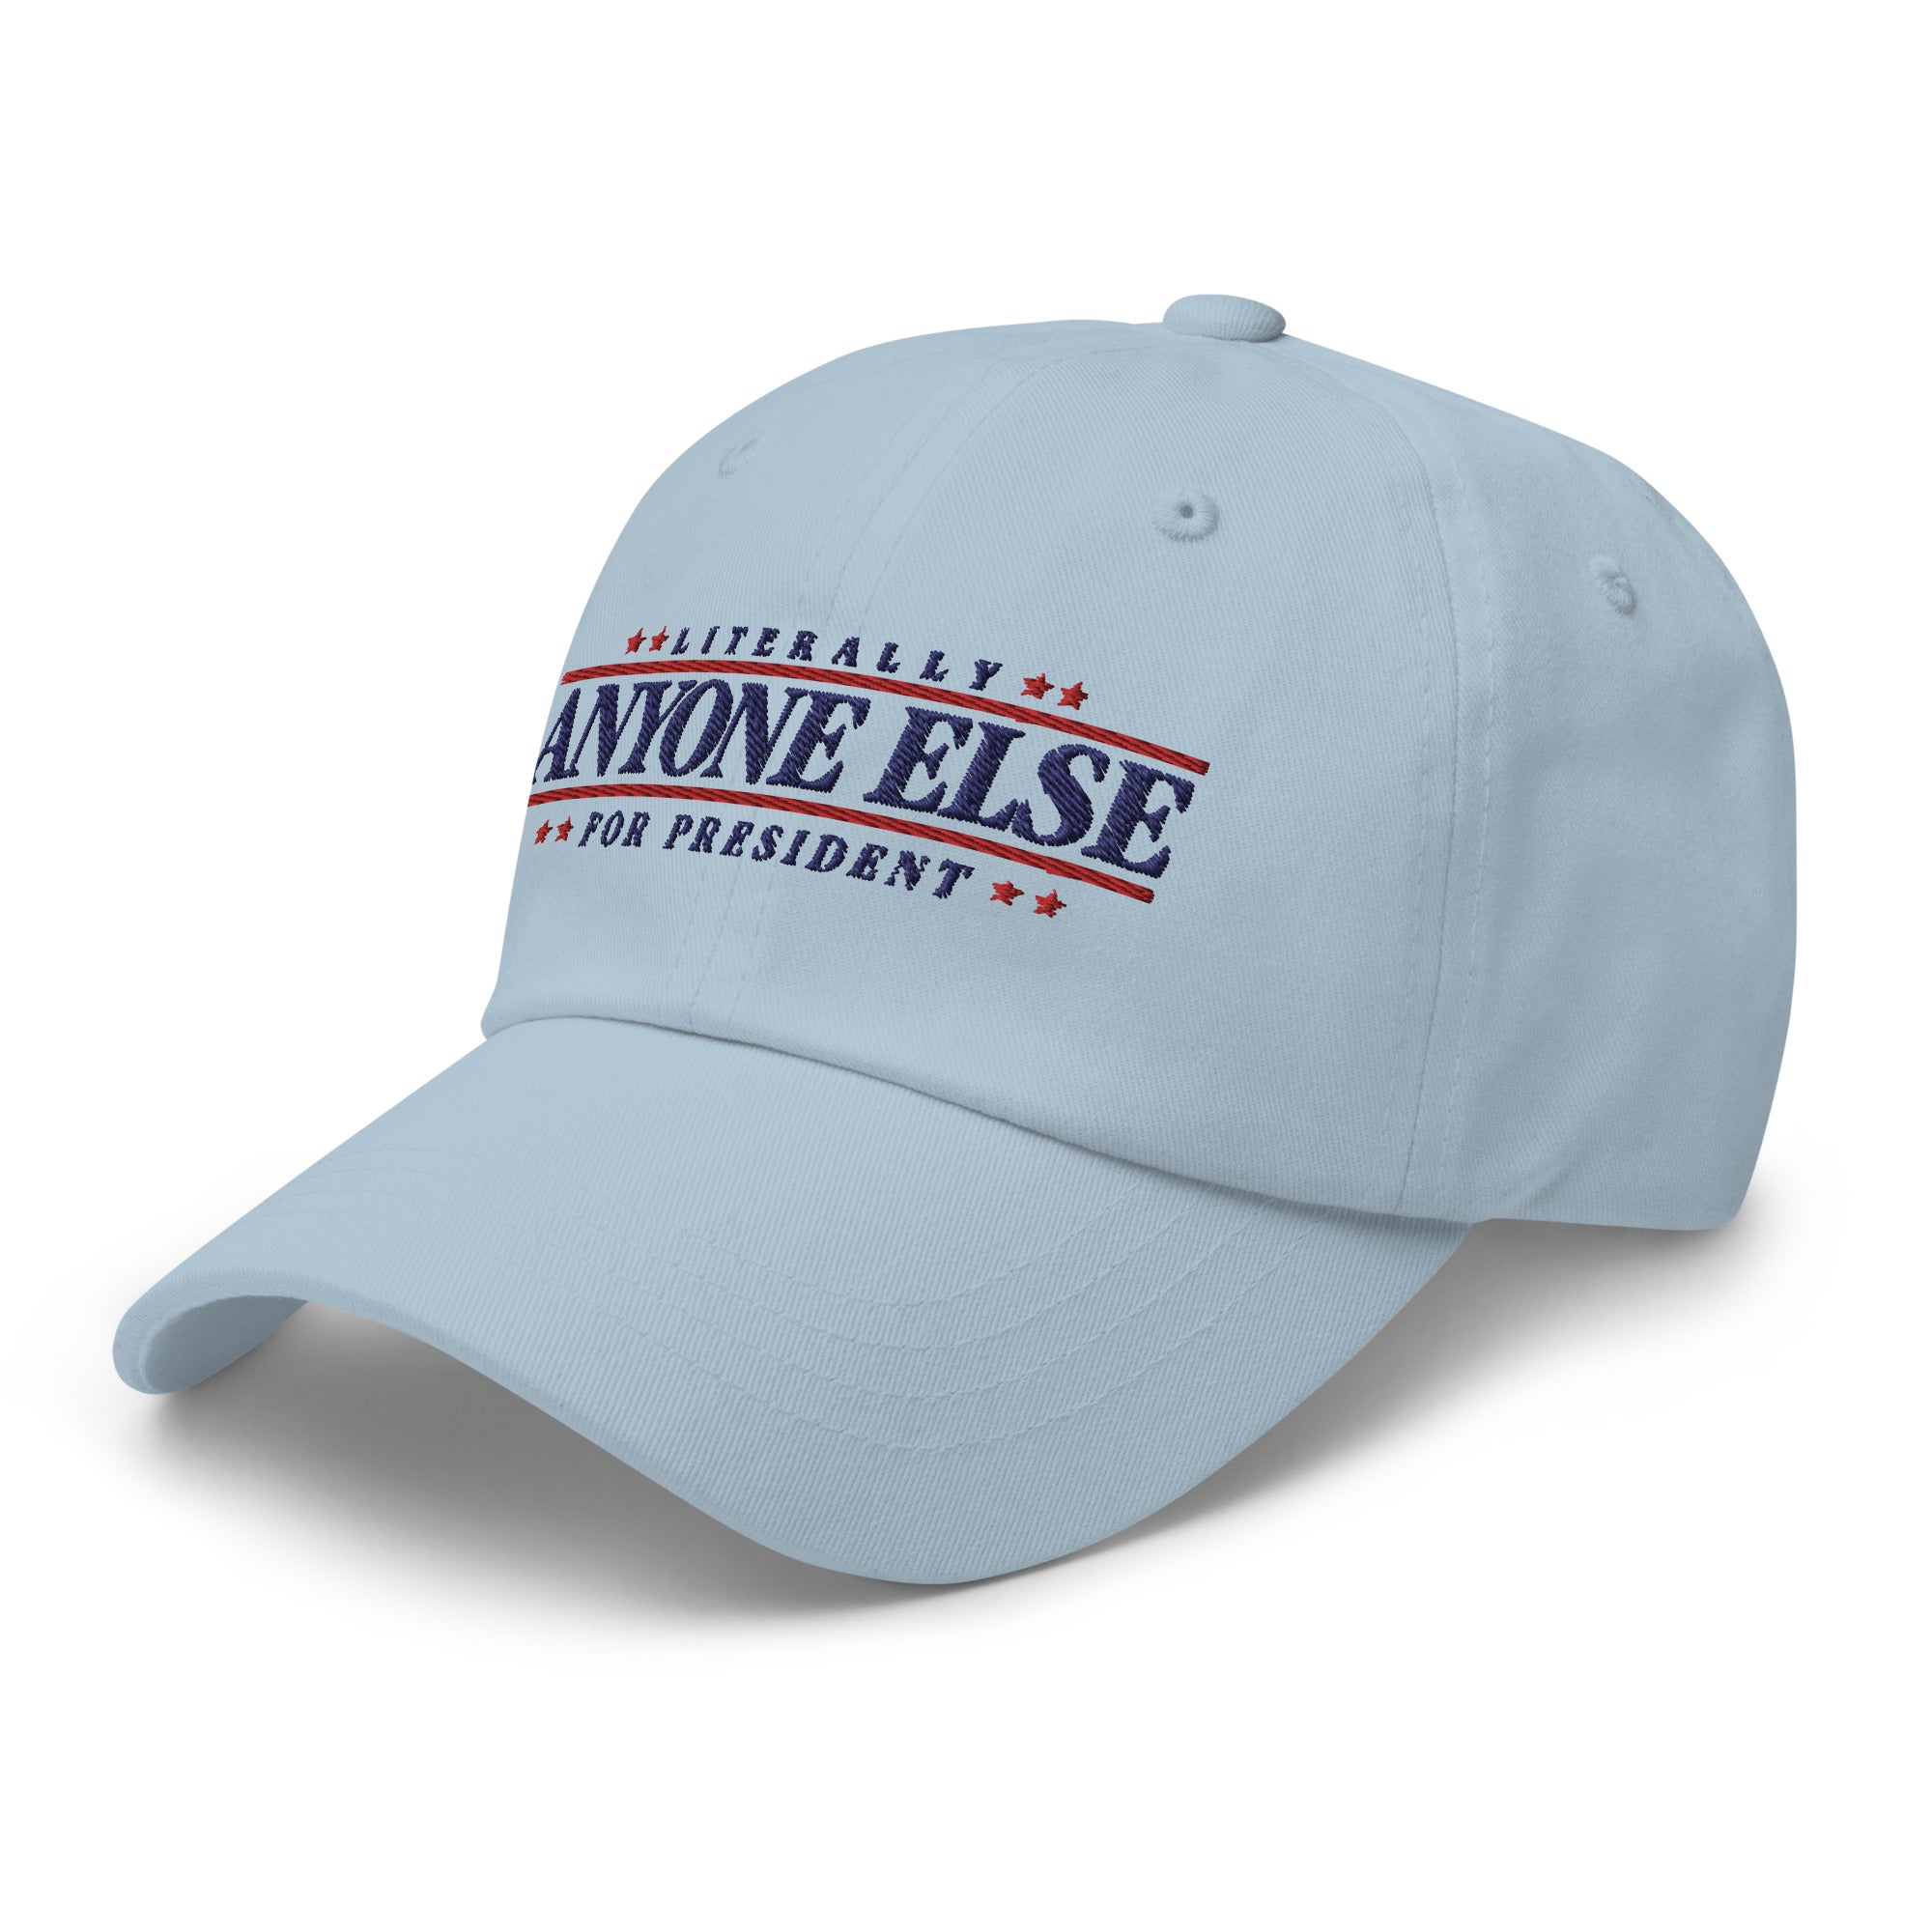 Literally Anyone Else for President Dad Hat